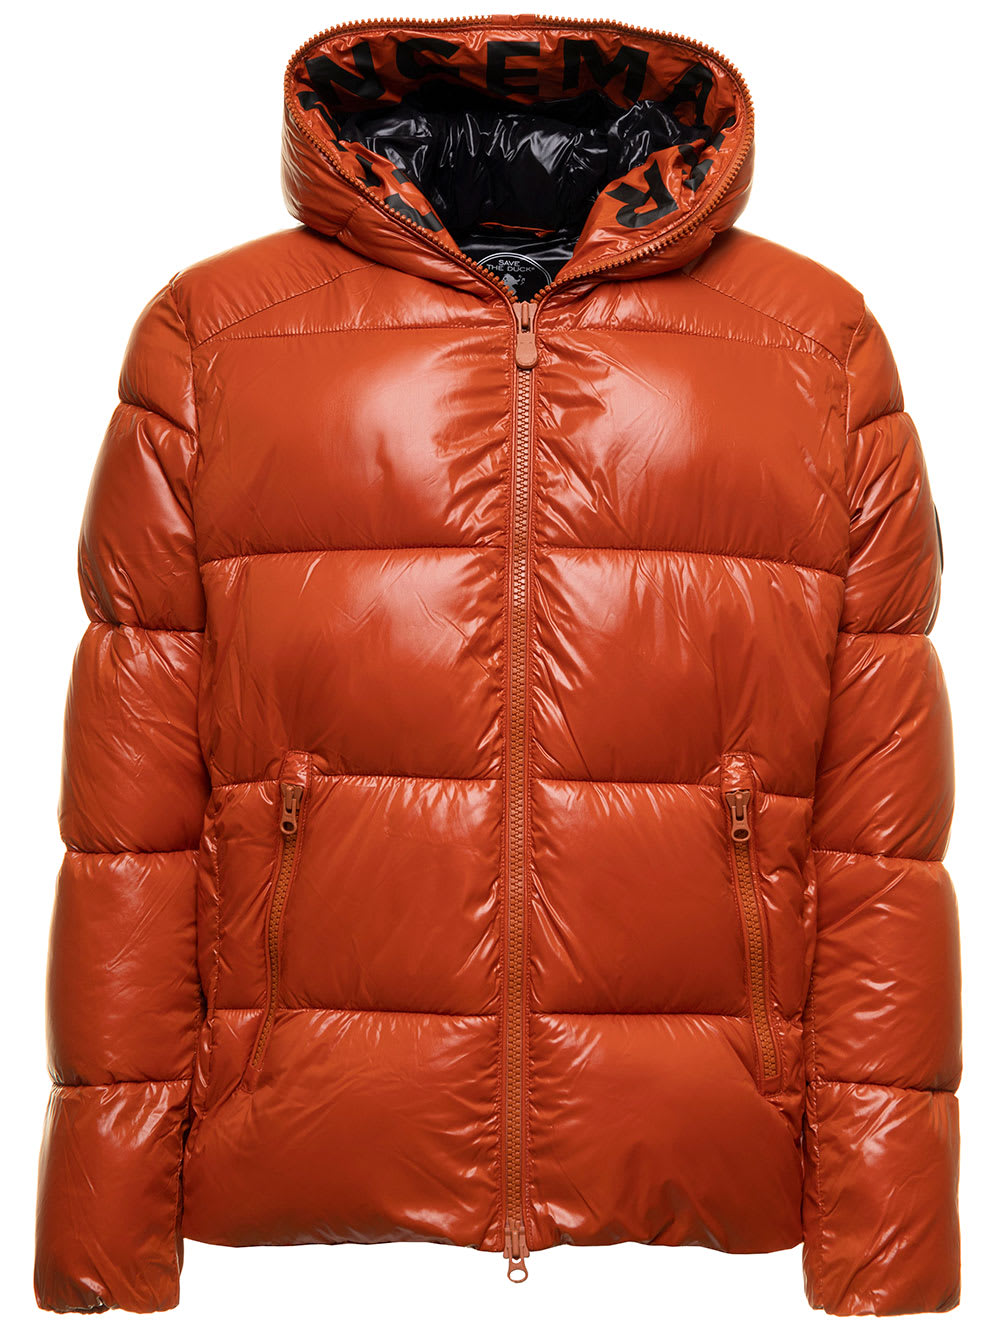 Edgard Orange Down Jacket In Padded And Quilted Tech Fabric Save The Duck Man